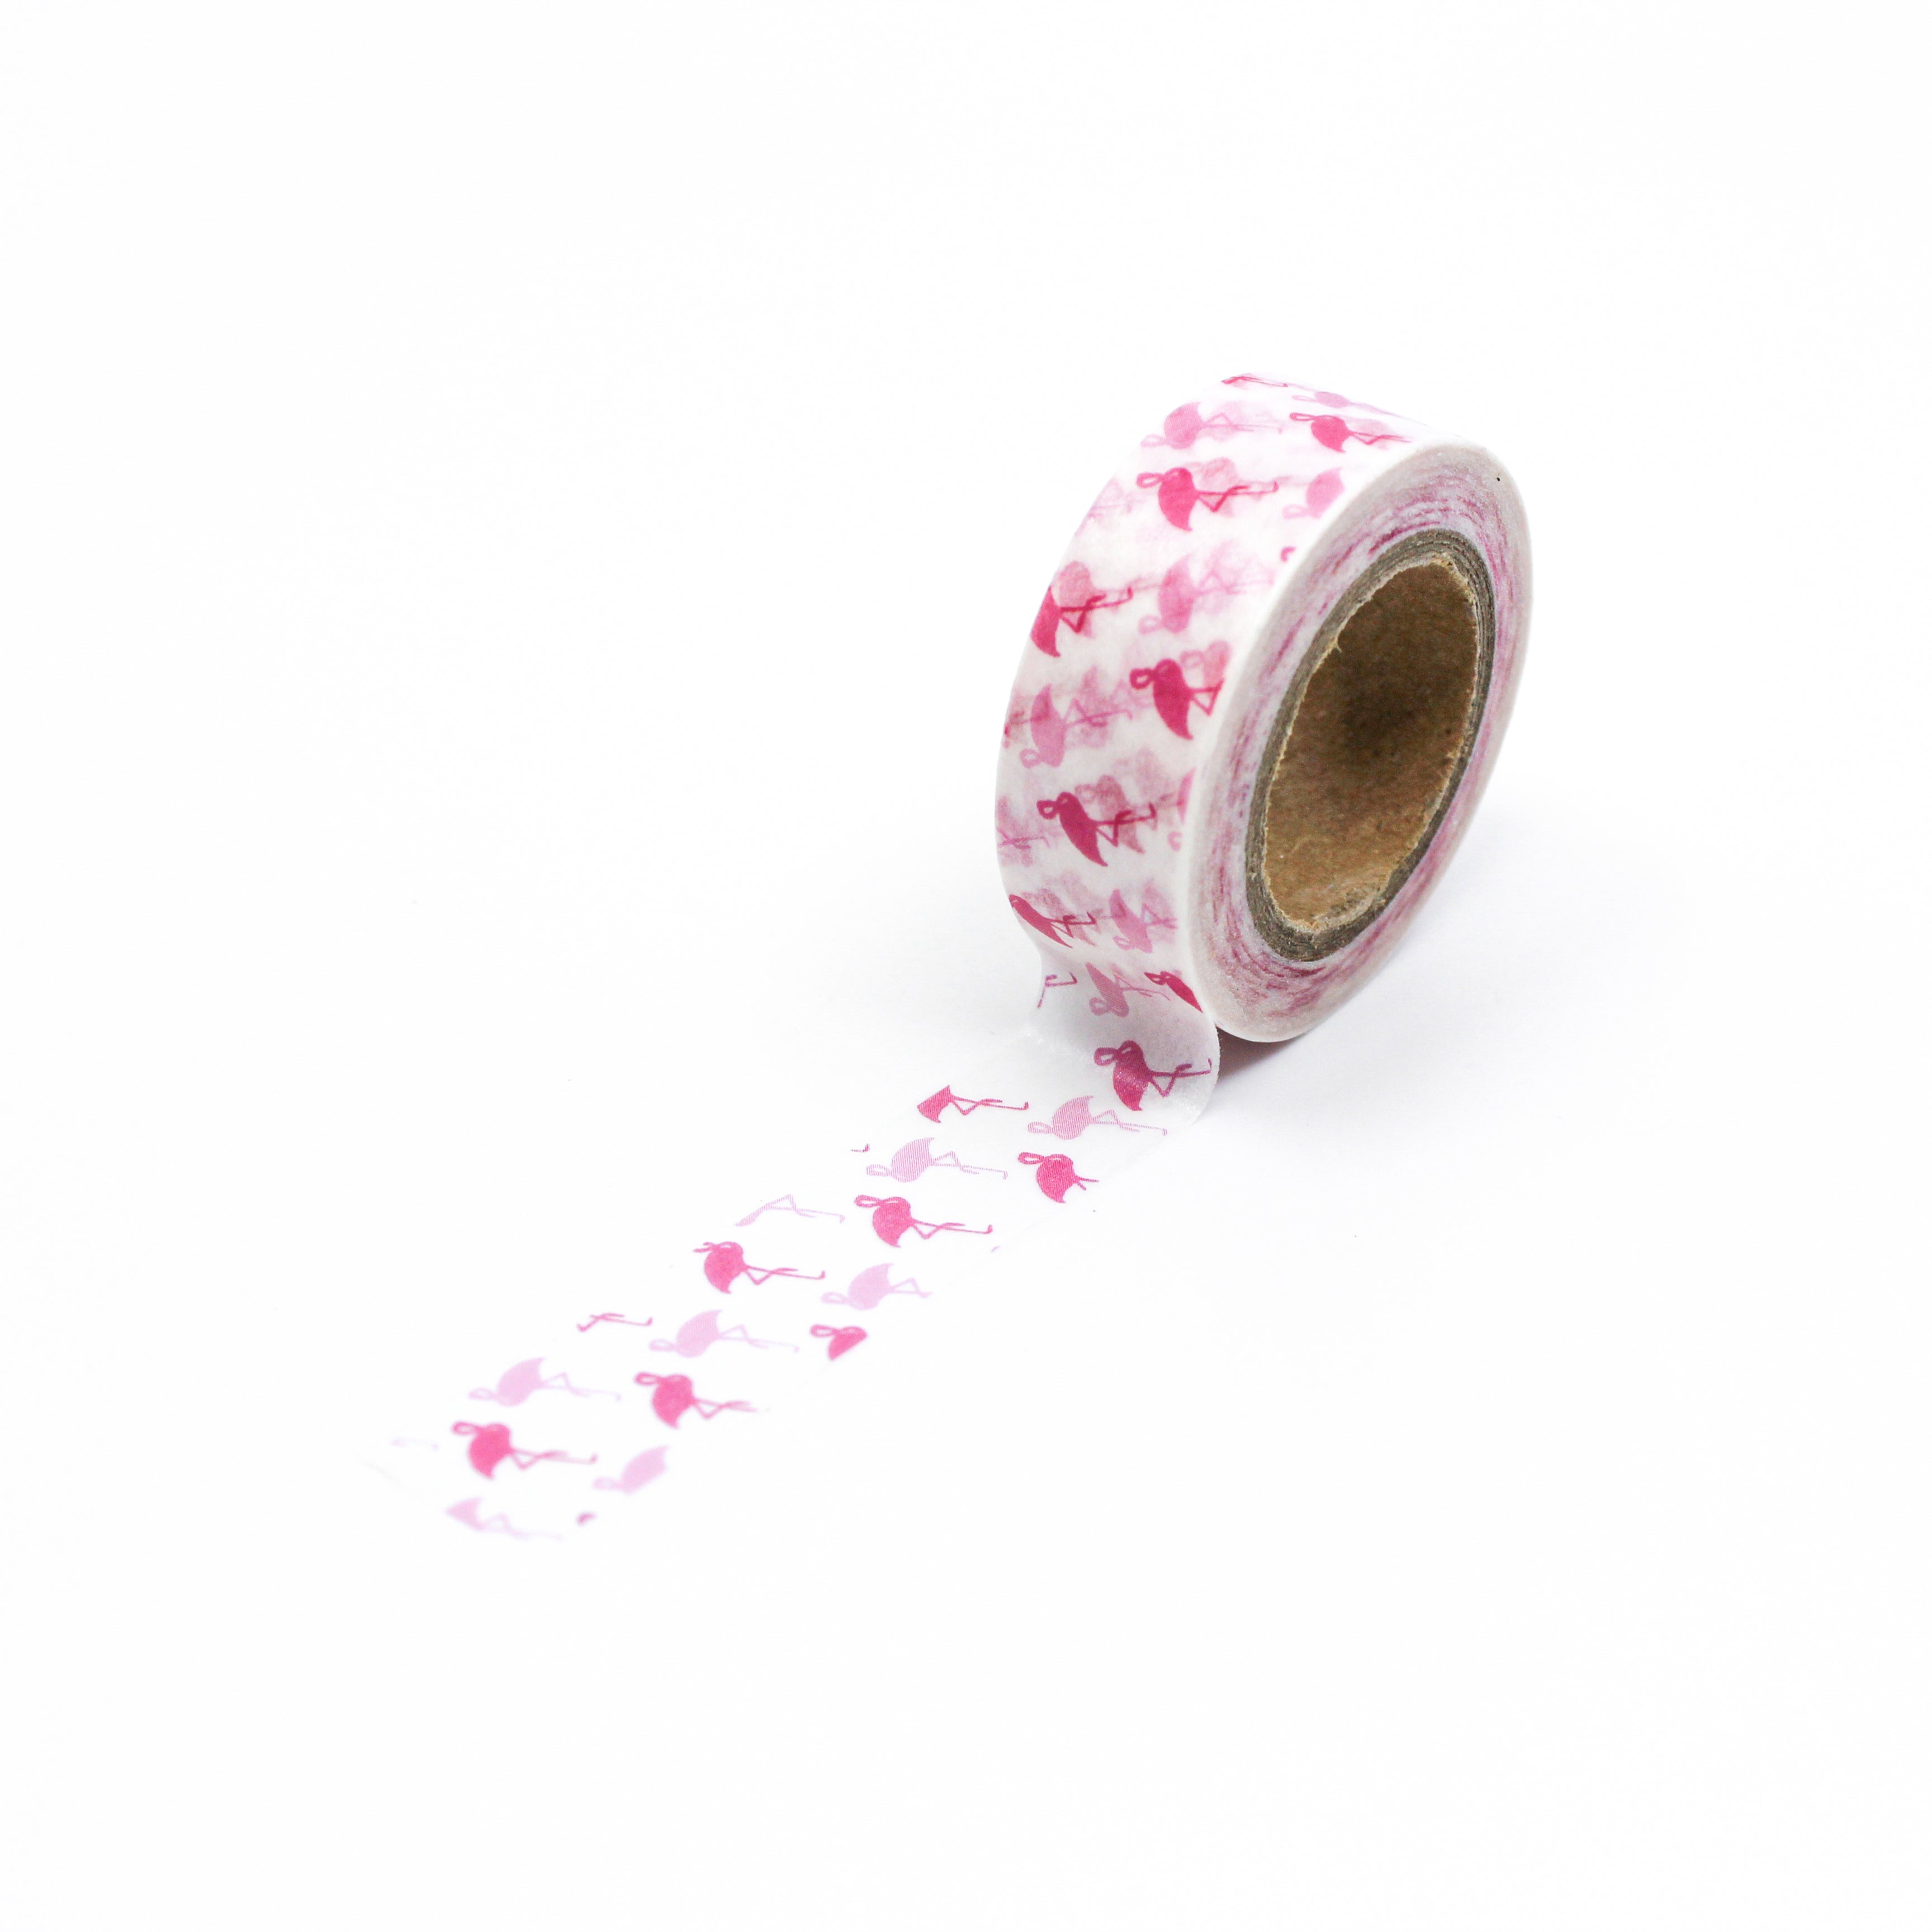 This is a repeat full view of pink small flamingo pattern washi tape from BBB Supplies Craft Shop